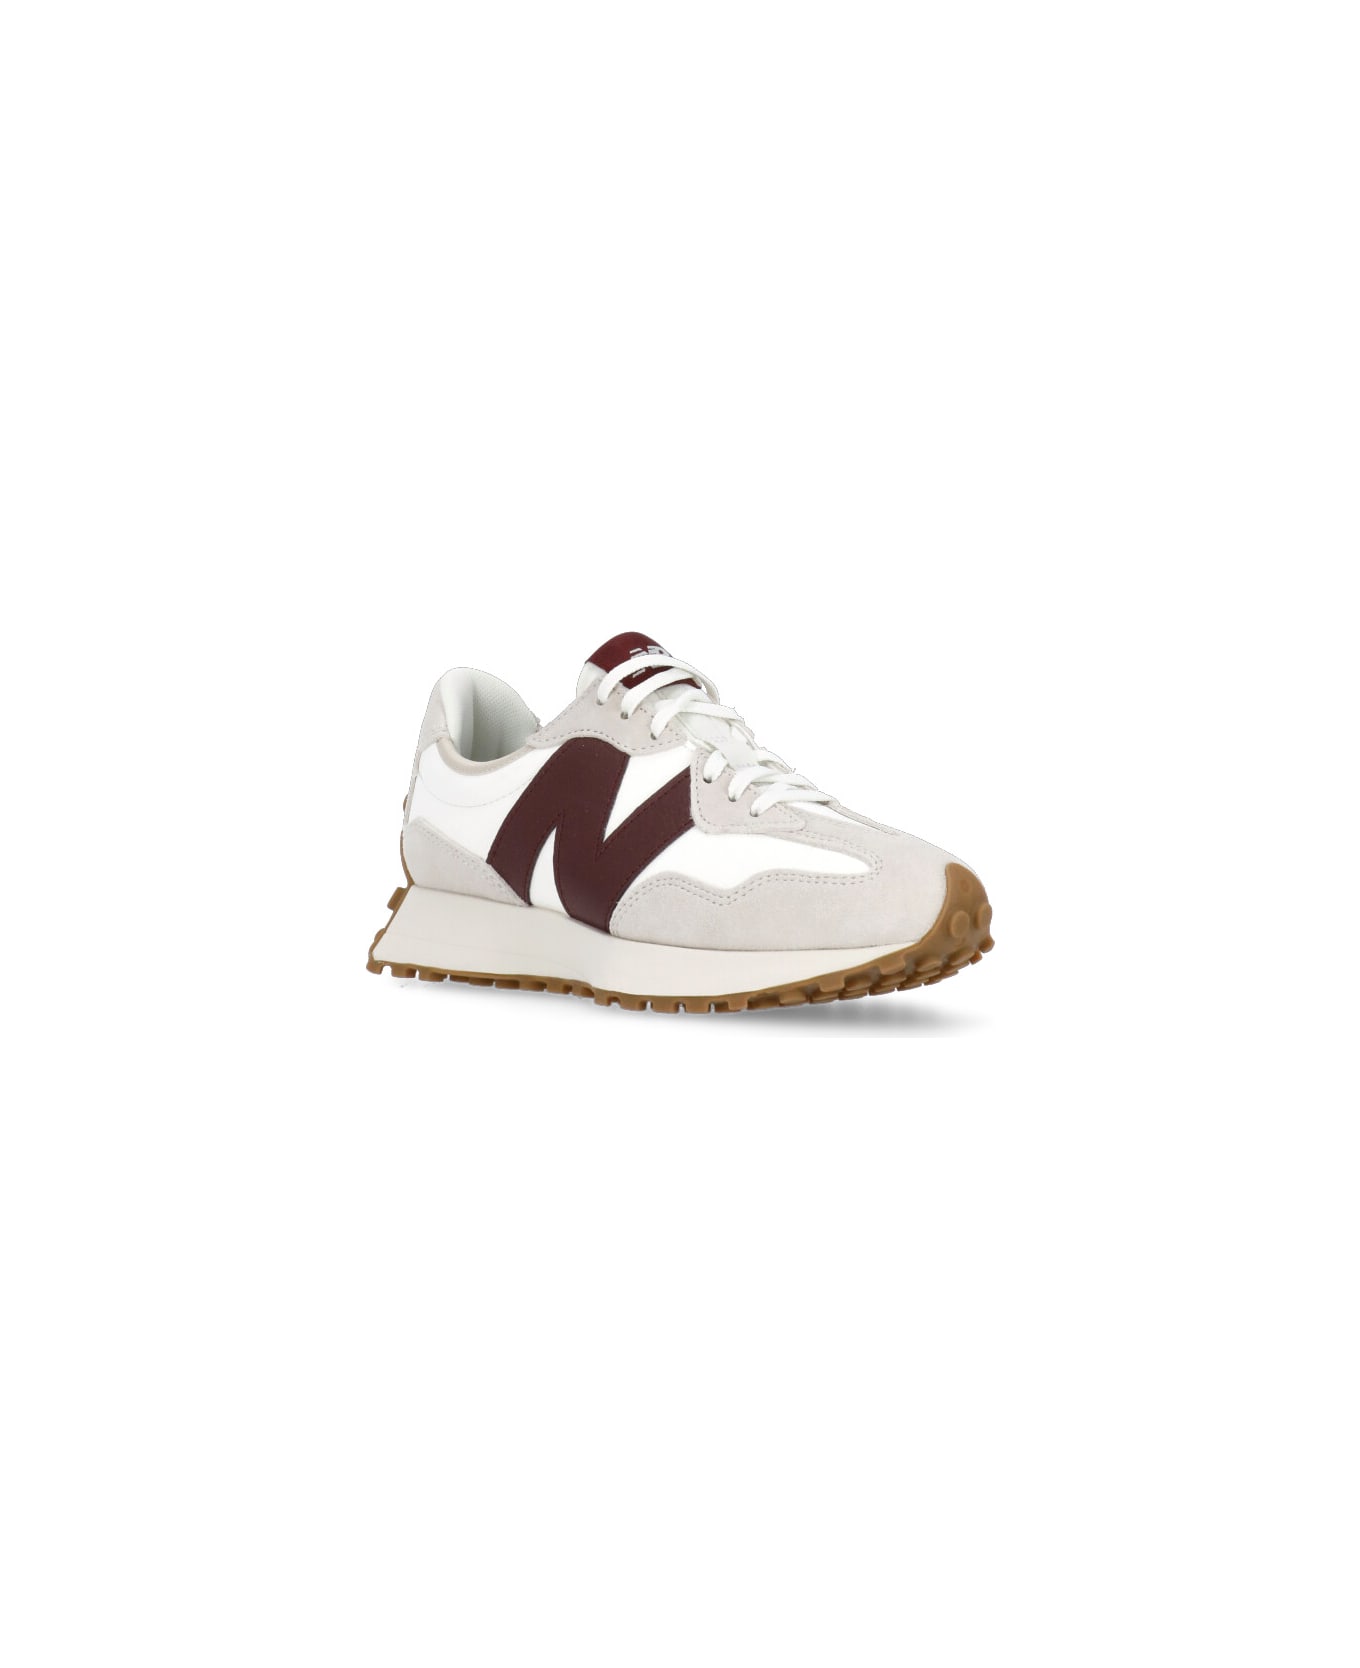 New Balance 327 Sneakers - Ivory